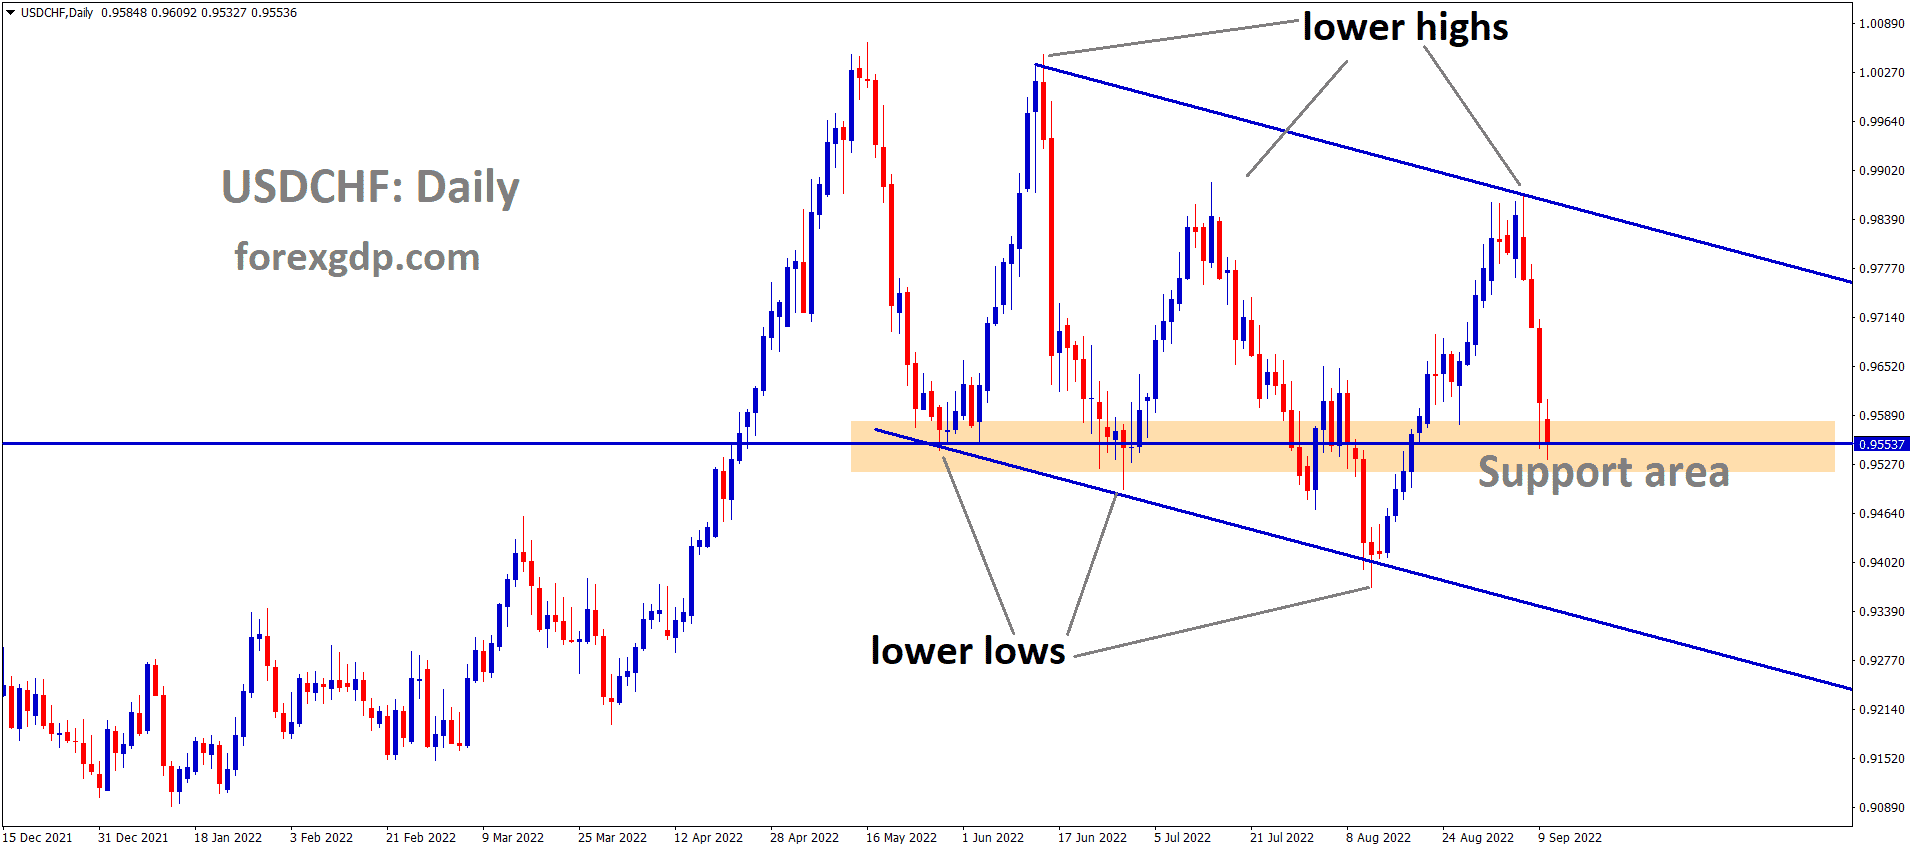 USDCHF is moving in the Descending channel and the market has fallen from the lower high area and reached the horizontal support area of the pattern